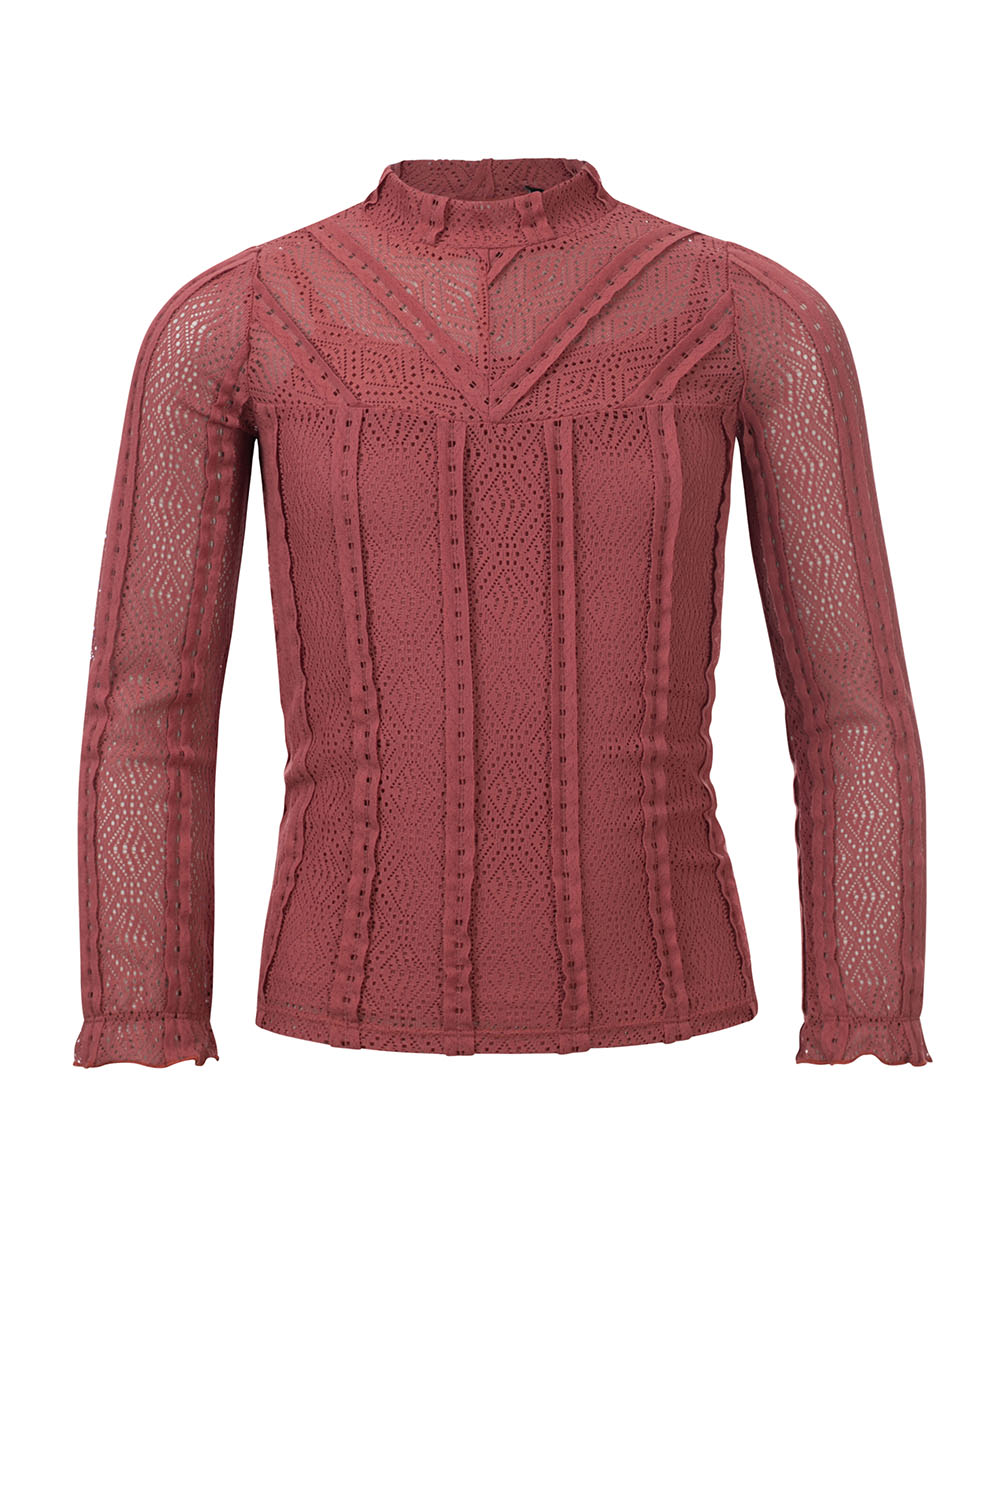 Lace top terracotta